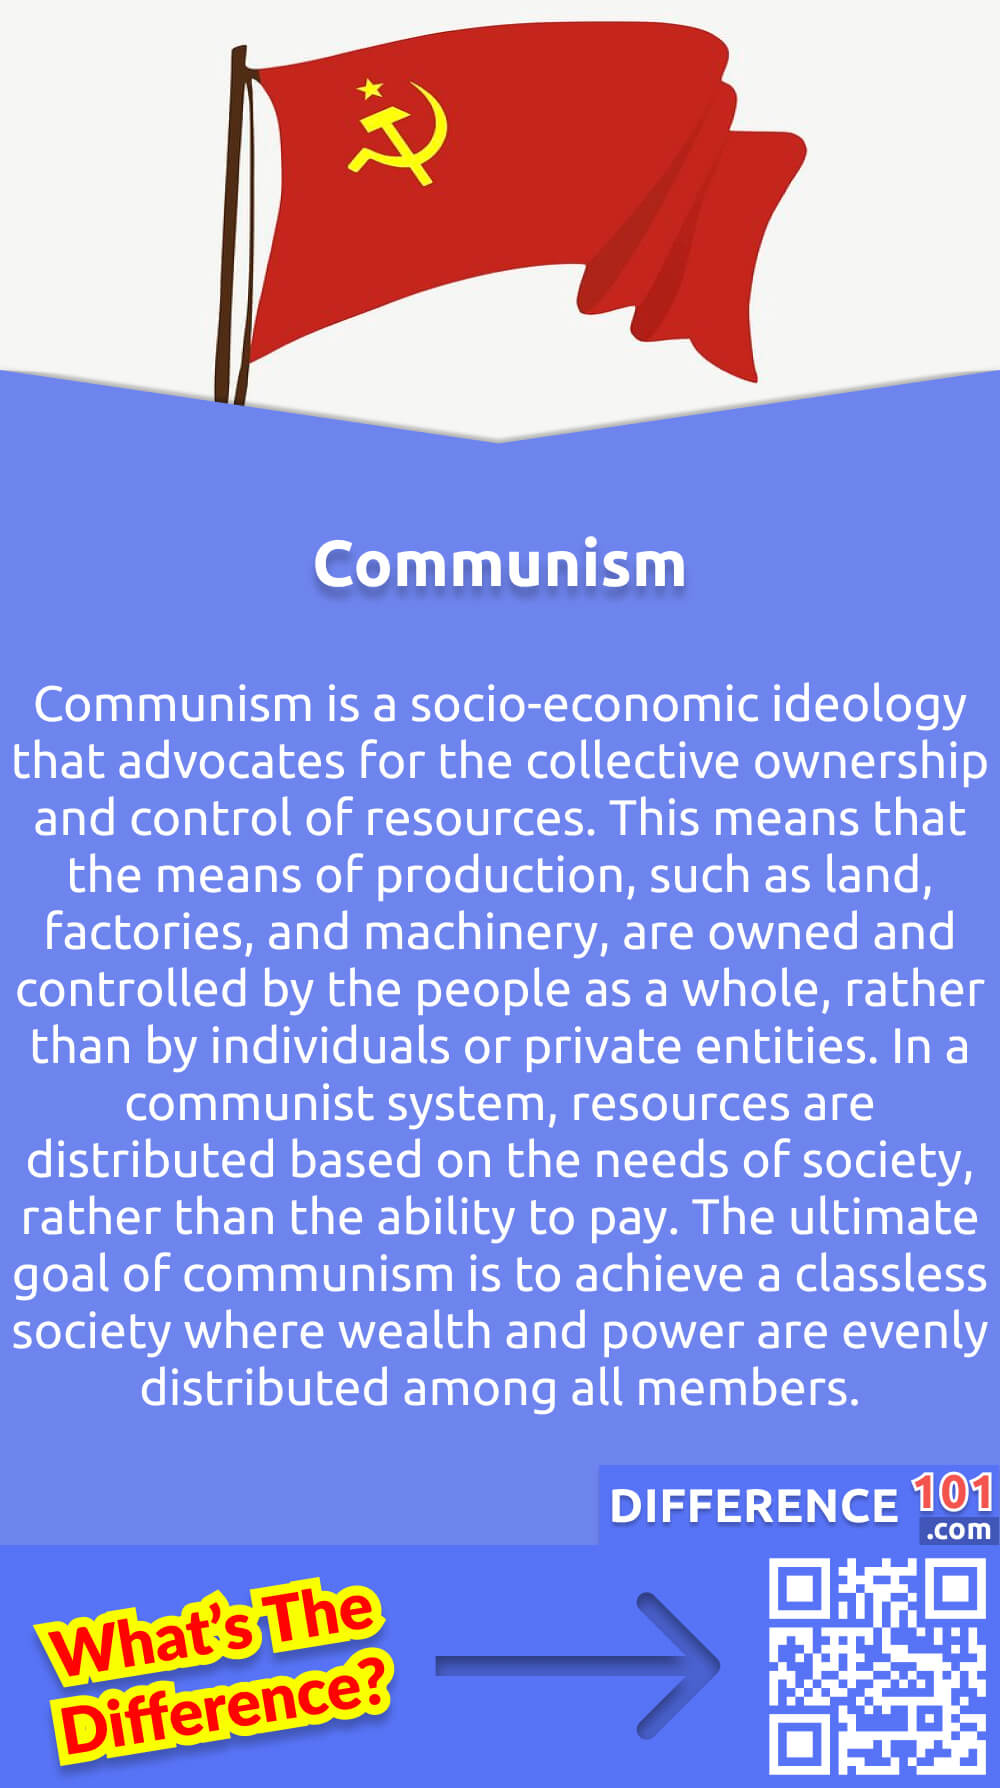 What Is Communism? Communism is a socio-economic ideology that advocates for the collective ownership and control of resources. This means that the means of production, such as land, factories, and machinery, are owned and controlled by the people as a whole, rather than by individuals or private entities. In a communist system, resources are distributed based on the needs of society, rather than the ability to pay. The ultimate goal of communism is to achieve a classless society where wealth and power are evenly distributed among all members. While communism has been implemented in various forms throughout history, it has often been met with criticism and opposition due to concerns of government control and lack of individual freedoms.